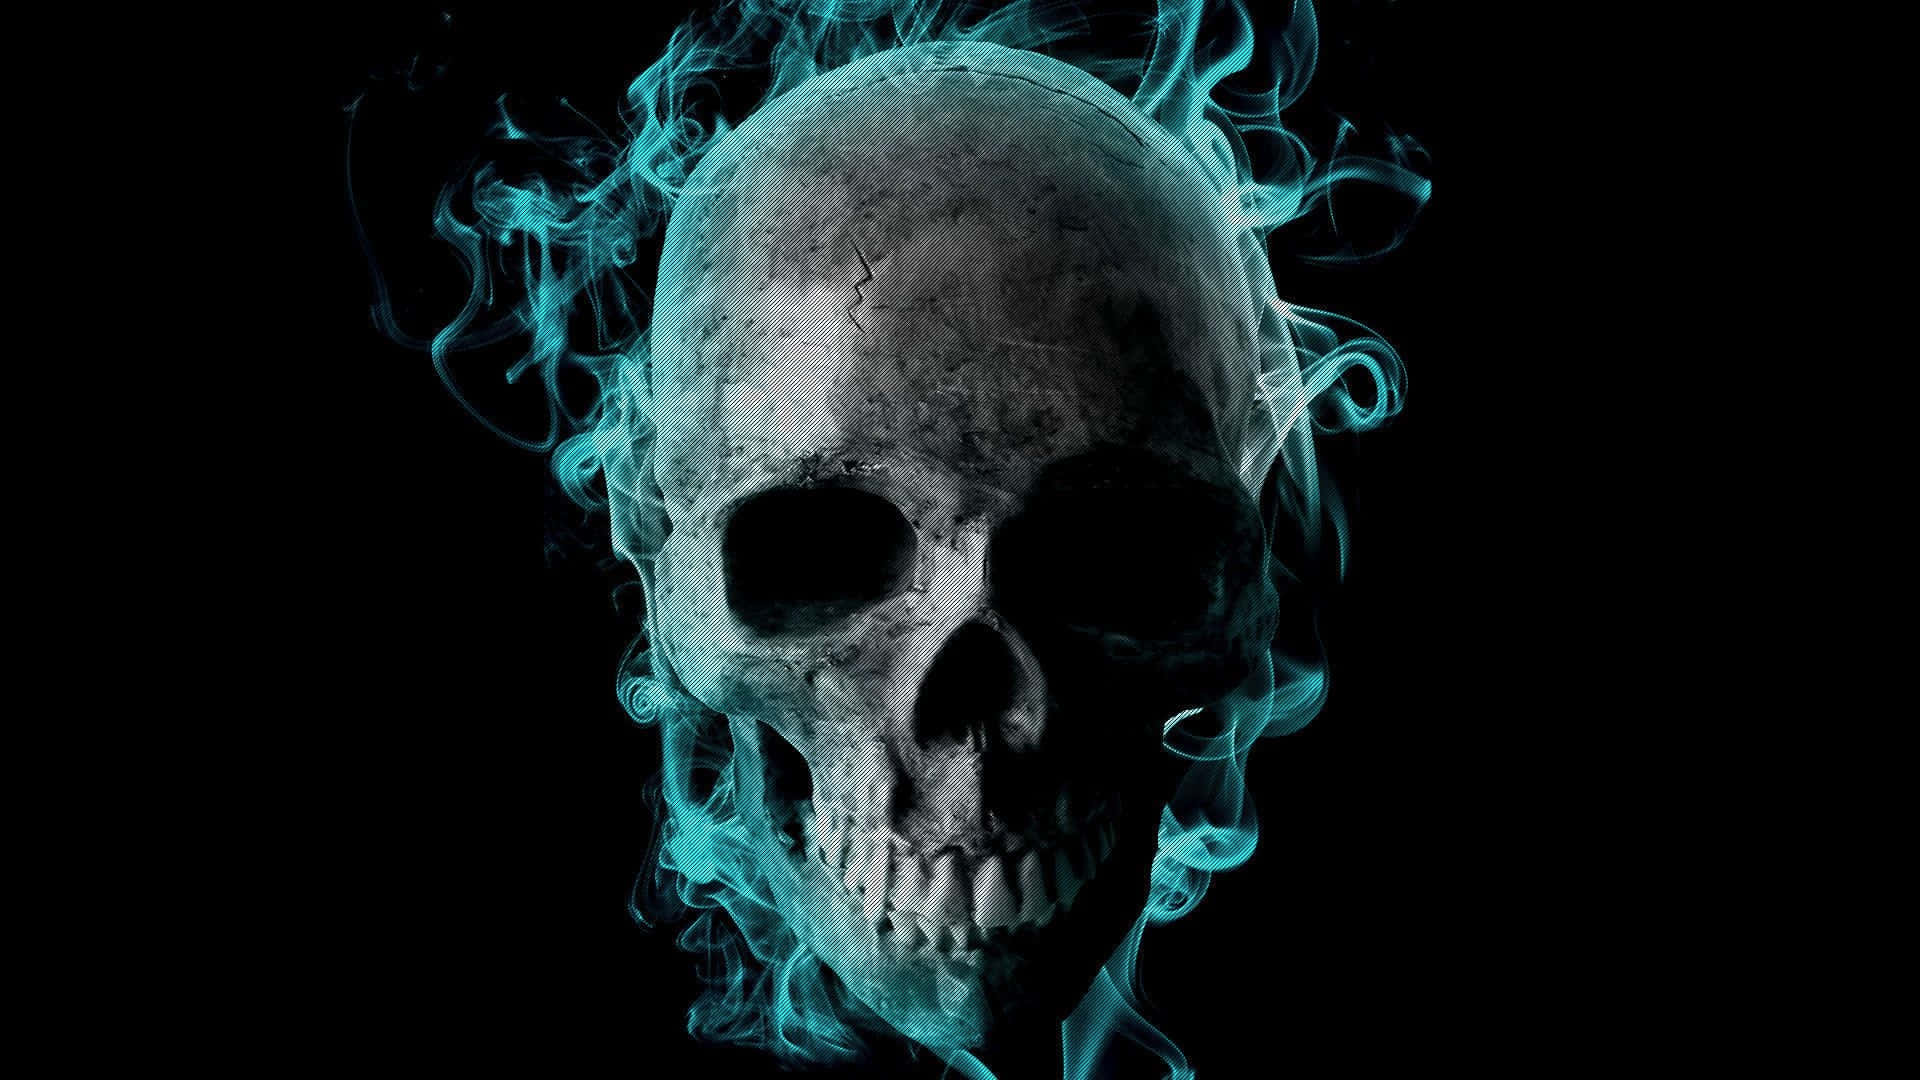 A Daring and Awesome Skull Design Wallpaper